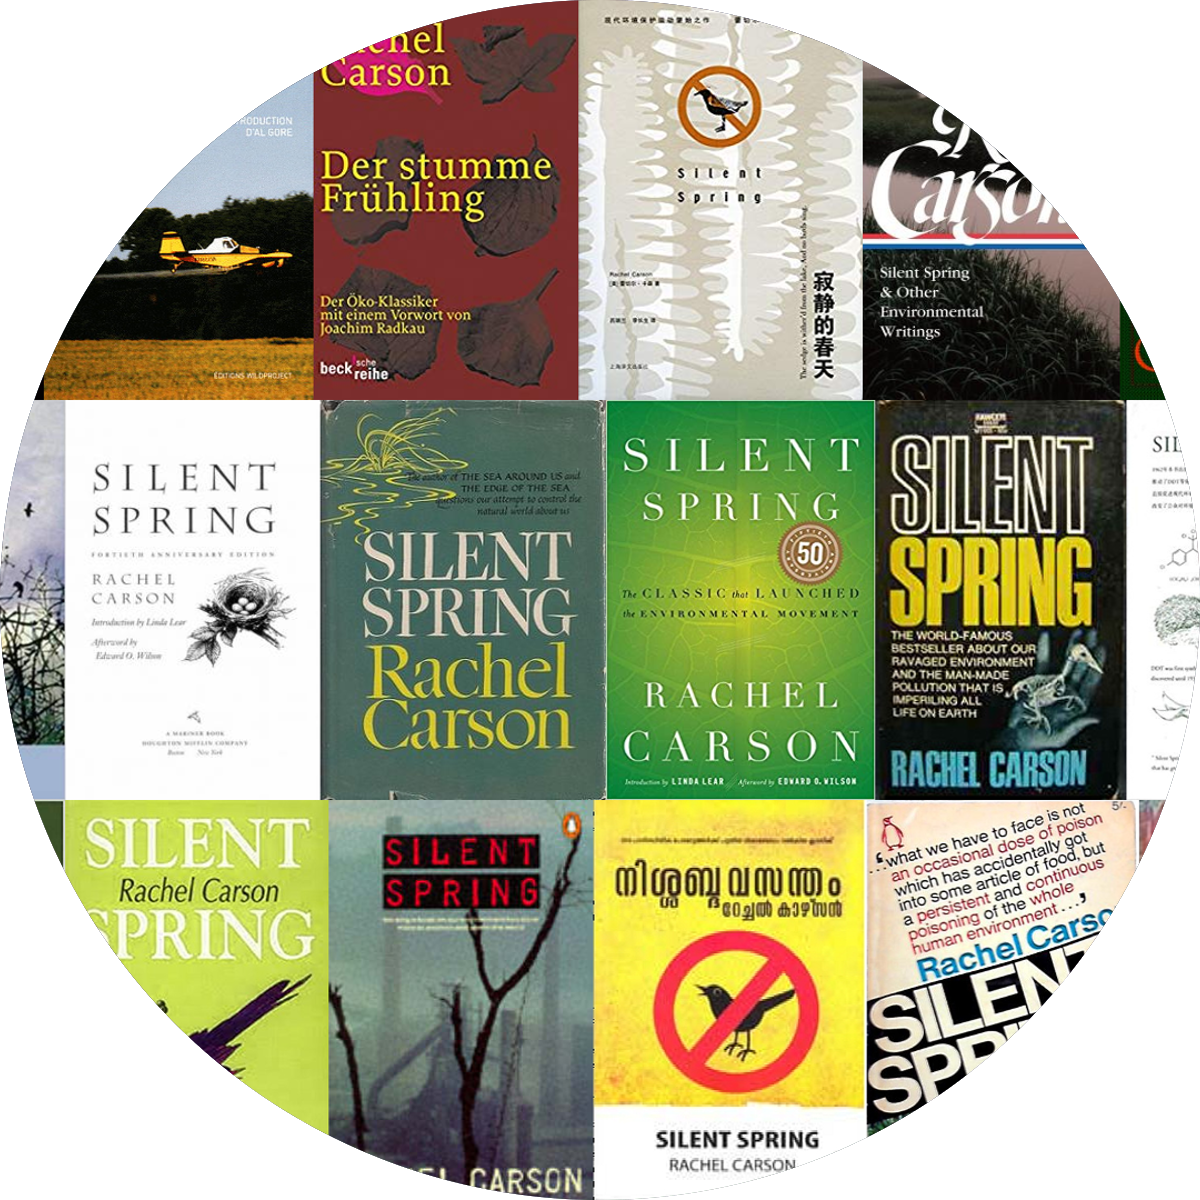 Listening to Silent Spring